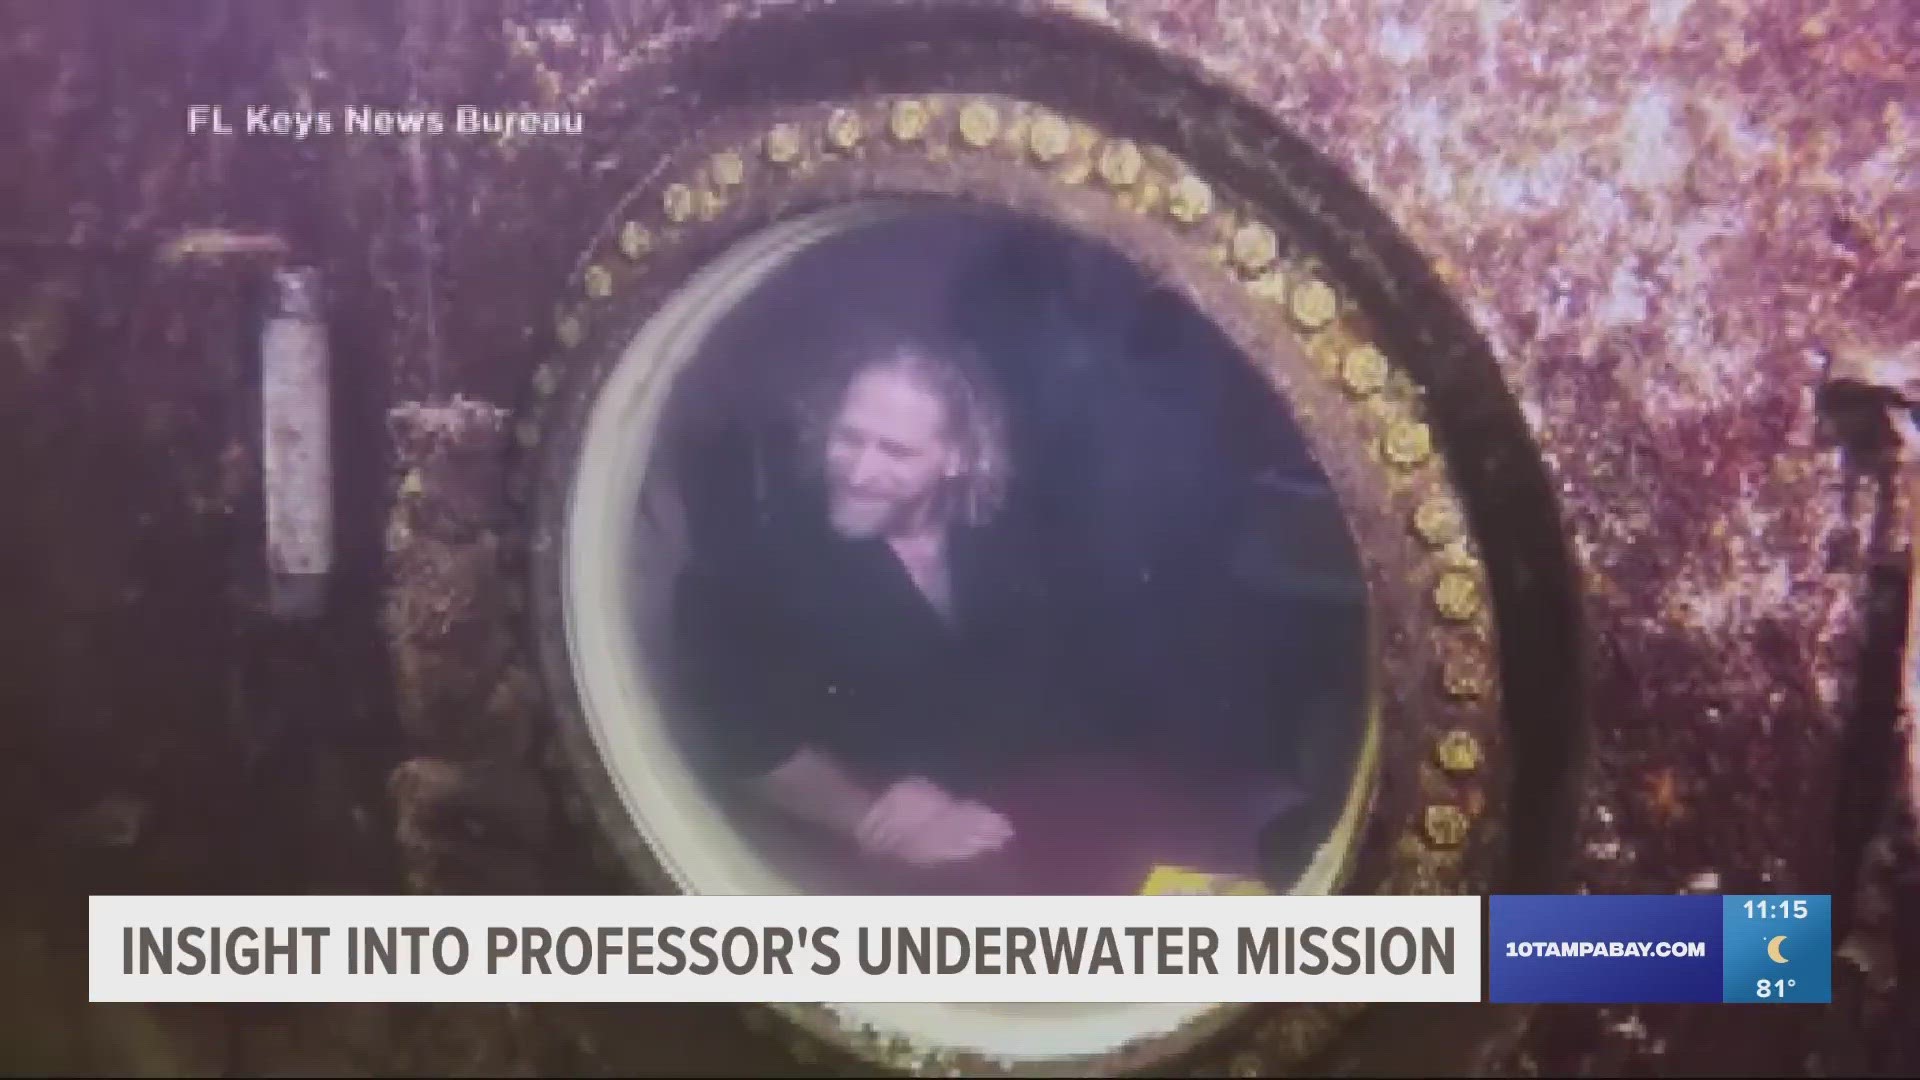 Dr. Joseph Dituri resurfaced after setting a record for the longest time lived underwater at ambient pressure.